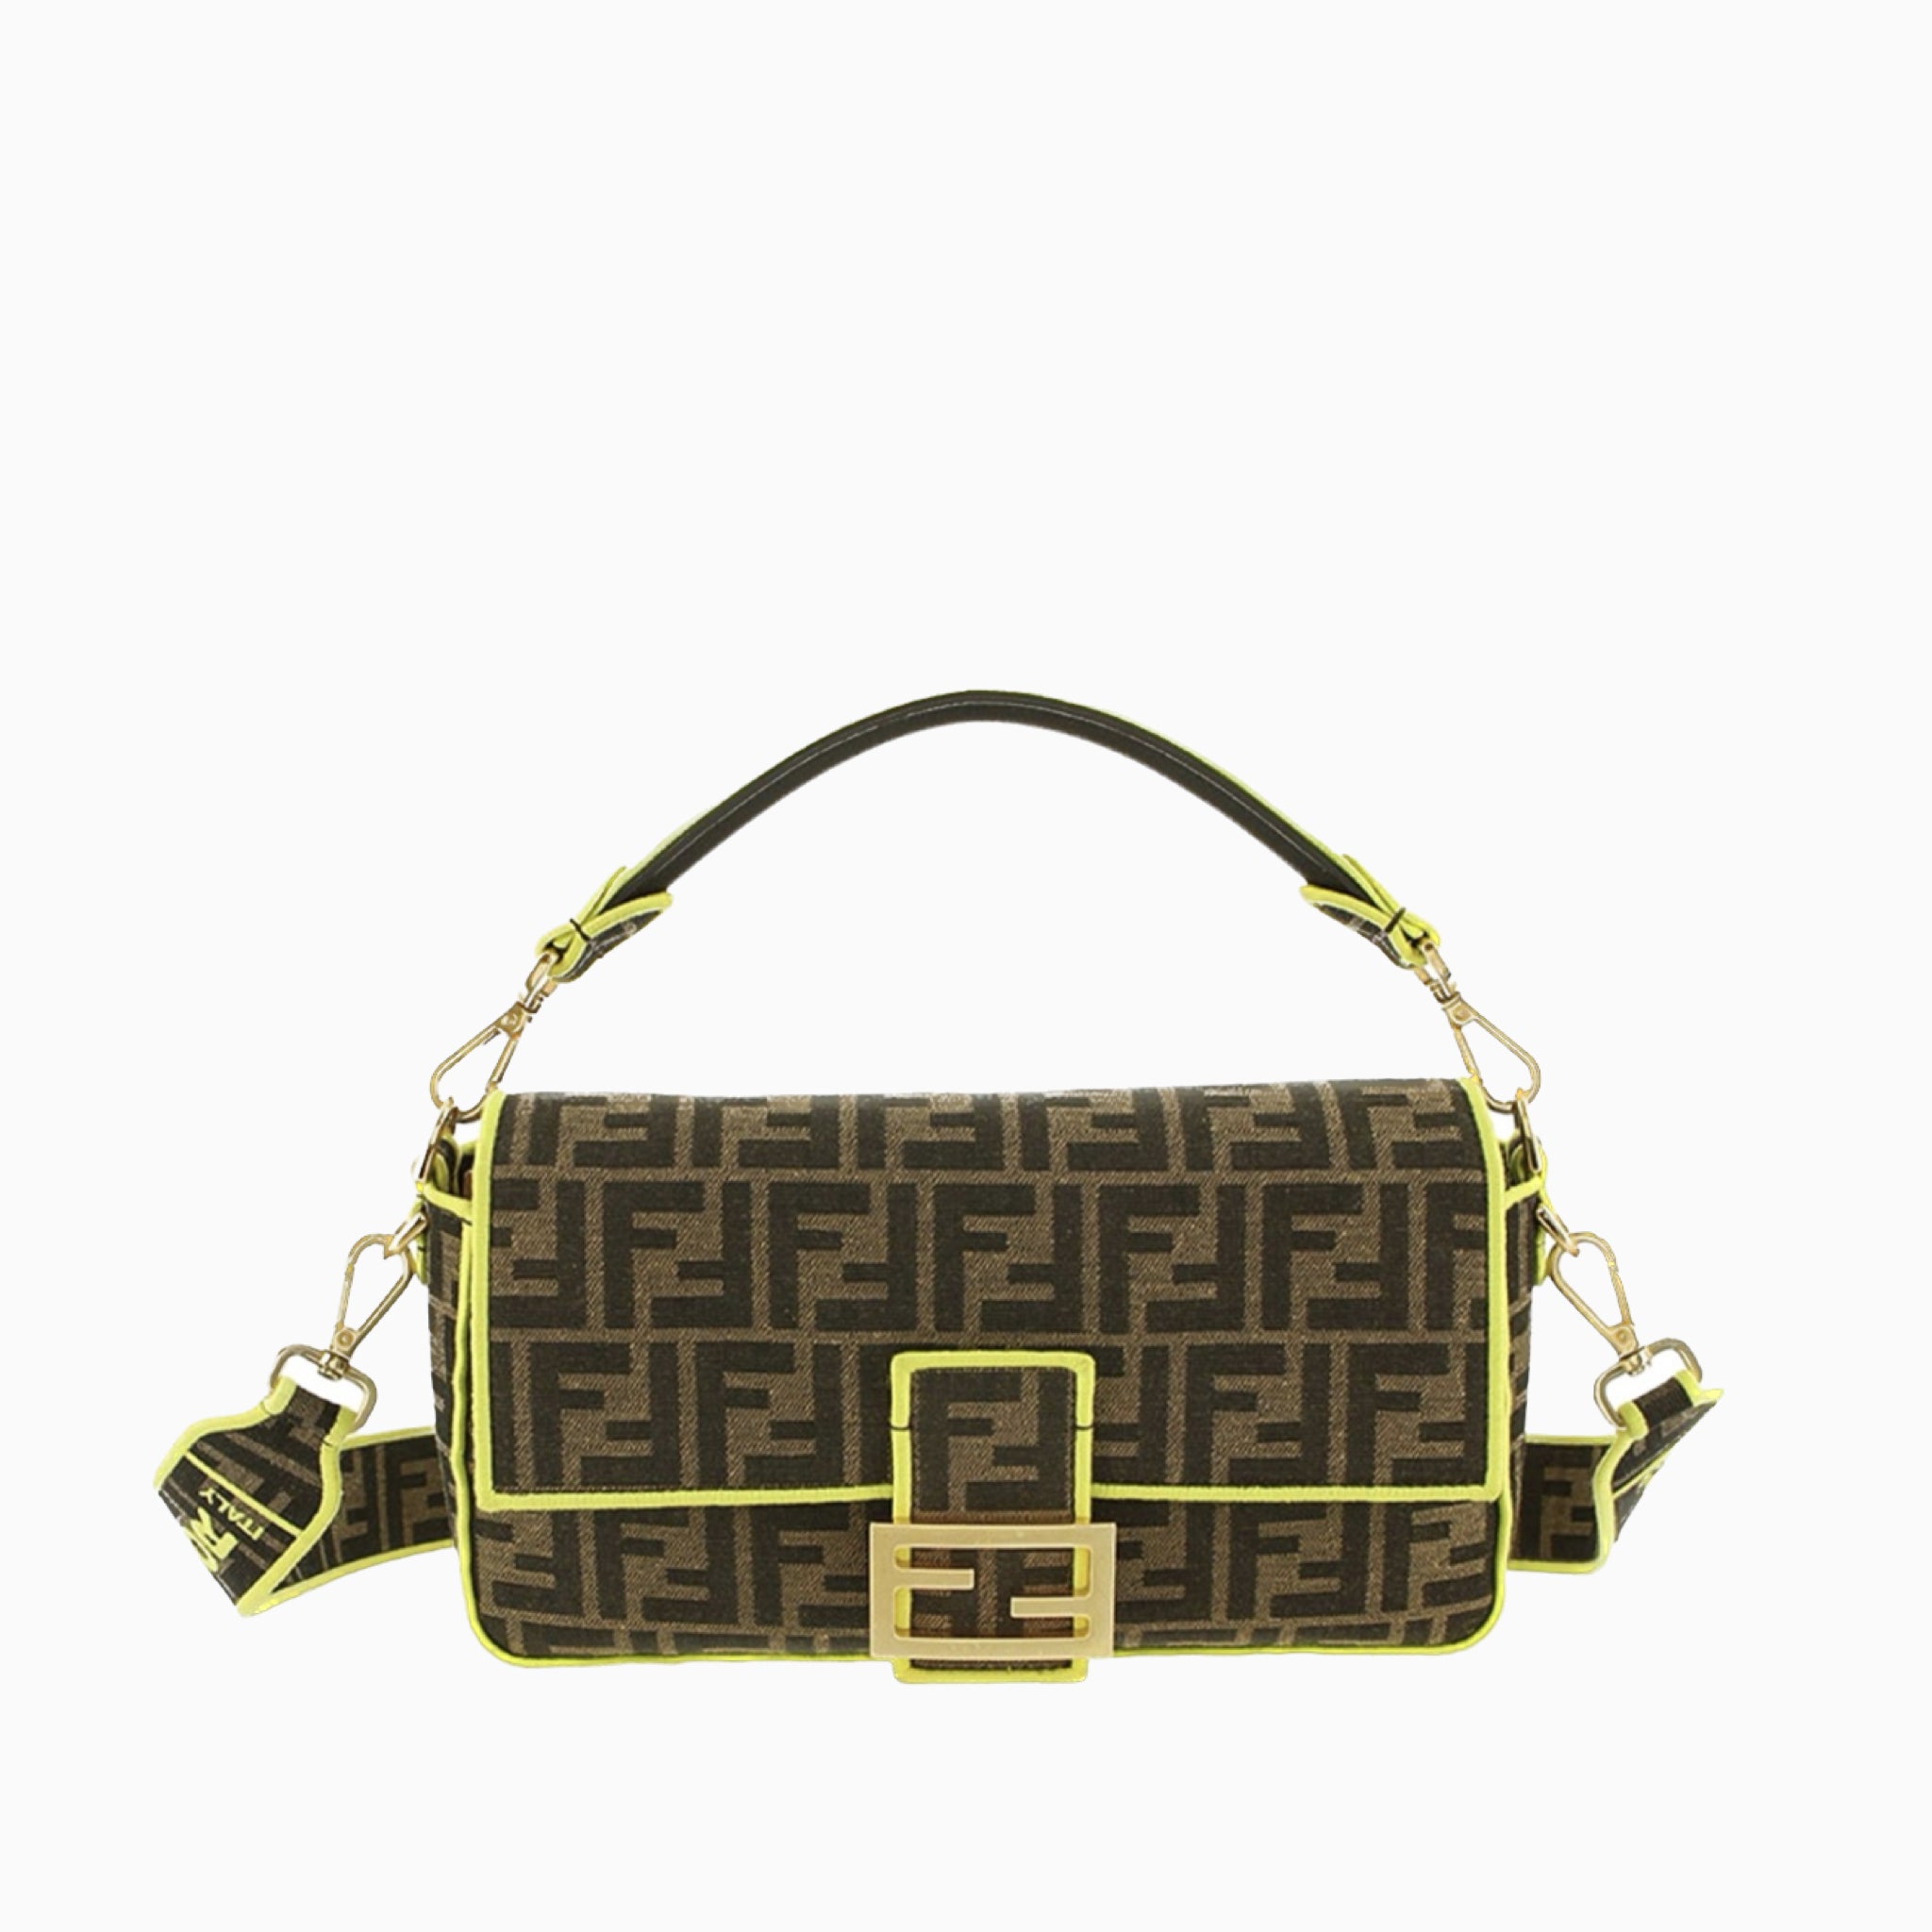 Sold FENDI Baguette Zucca Print canvas with Neon trimming